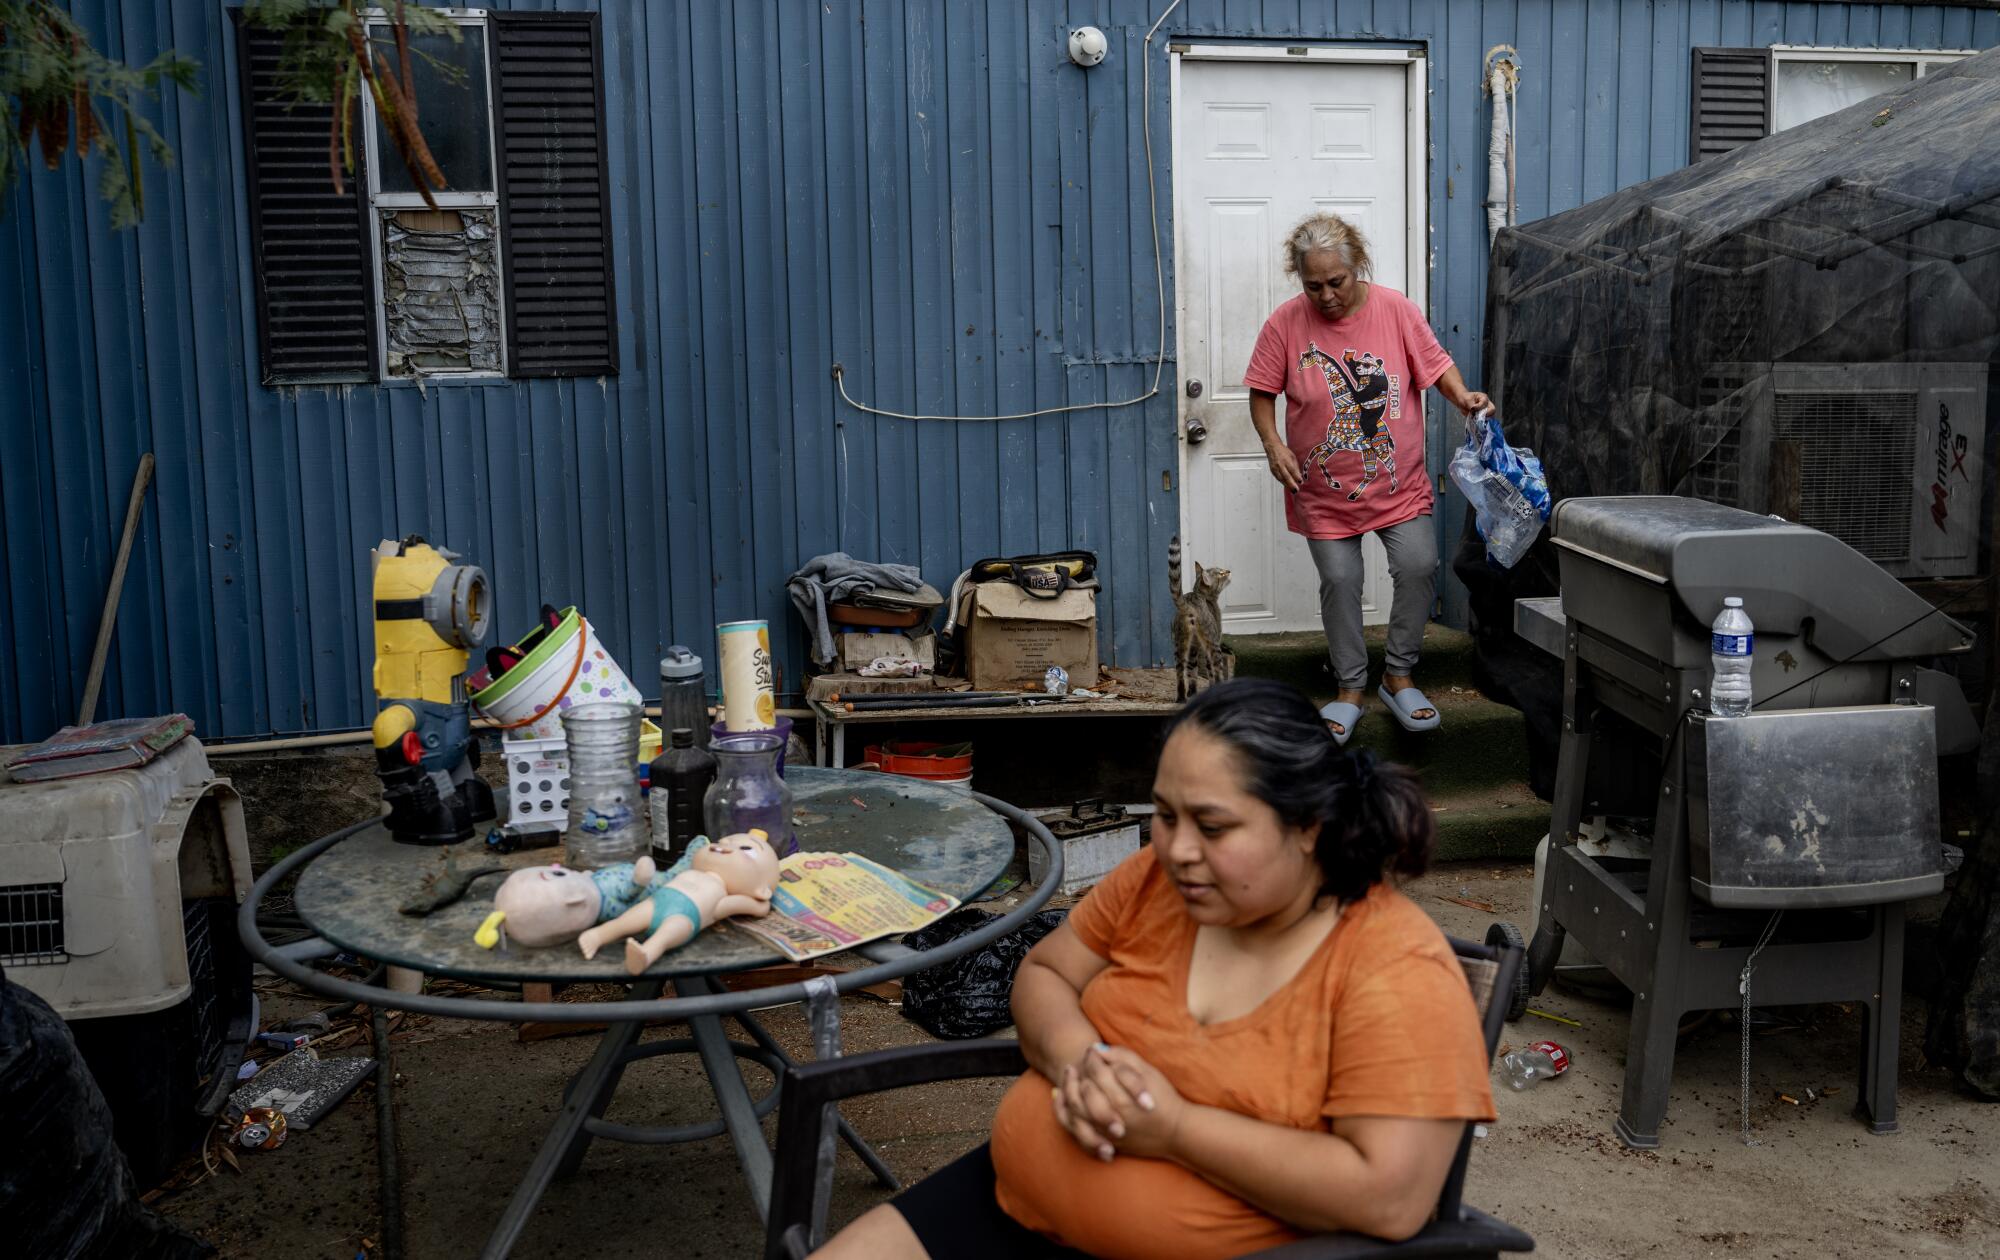 A woman carries bottled water outside her trailer while another woman sits at a table. 